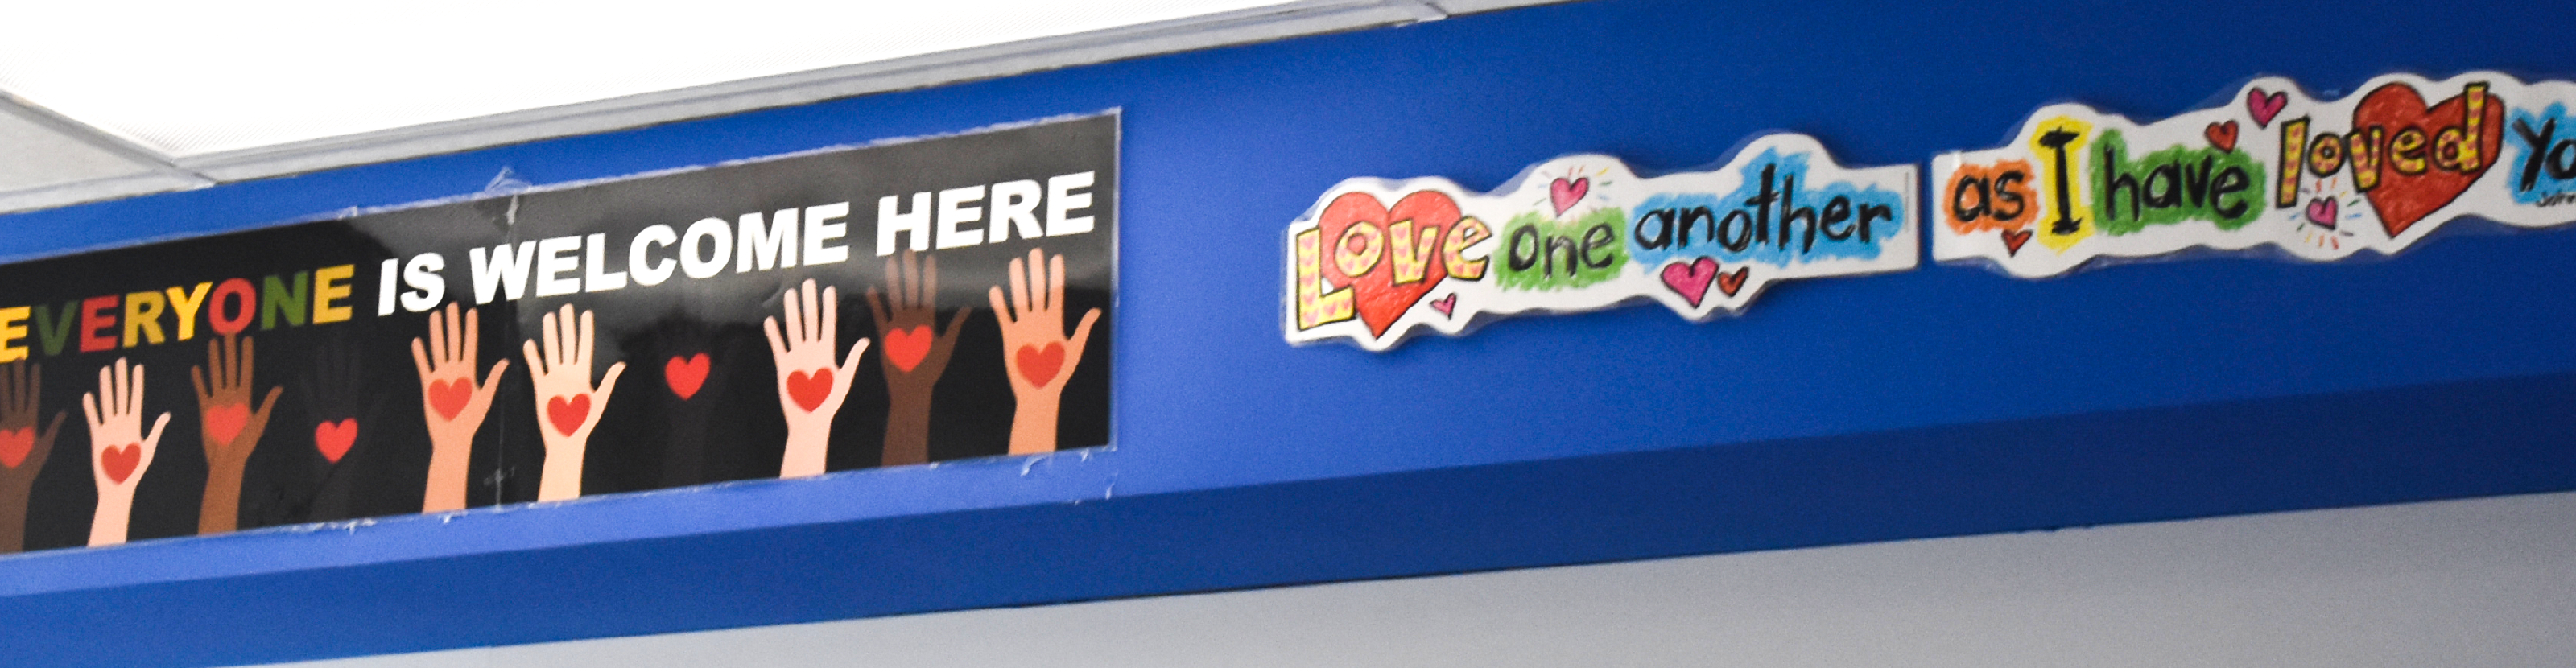 Photo of a school hallway with a banner saying "EVERYONE IS WELCOME HERE" on a background of raised hands of different skin tones, each of them holding a red heart. Next to it is another colourful banner saying "Love one another as I have loved you."